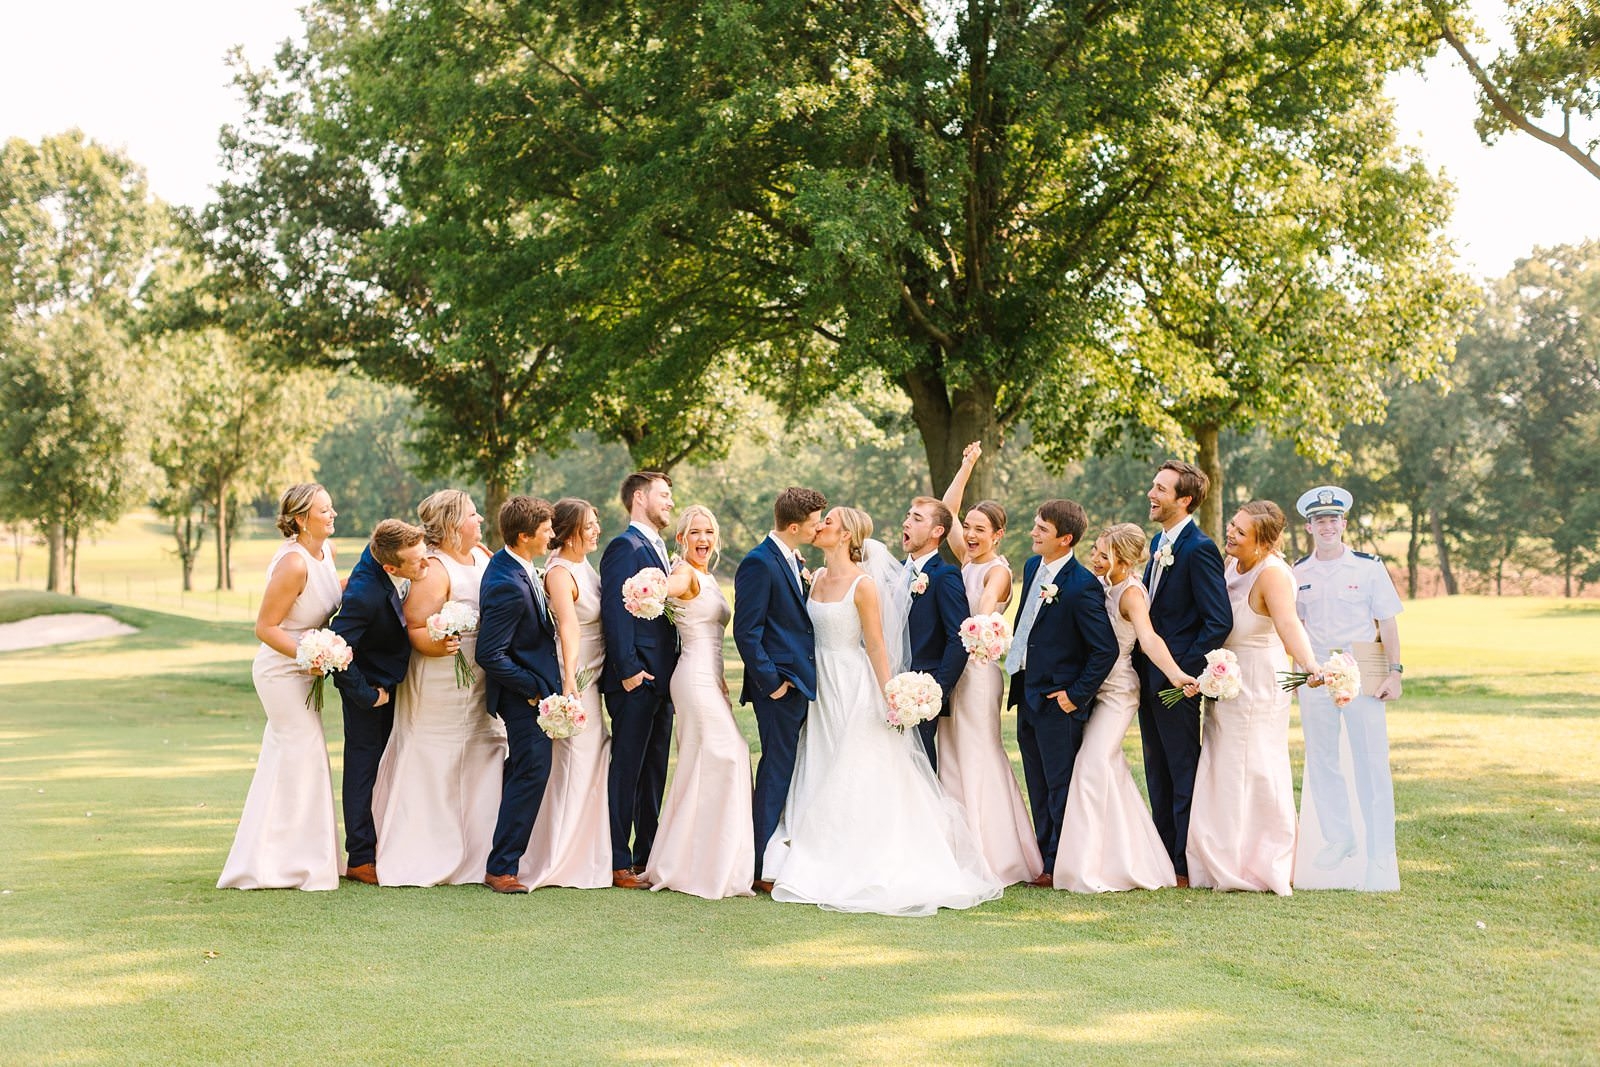 An Evansville Country Club Wedding | Ashley and Beau | Bret and Brandie Photography181.jpg